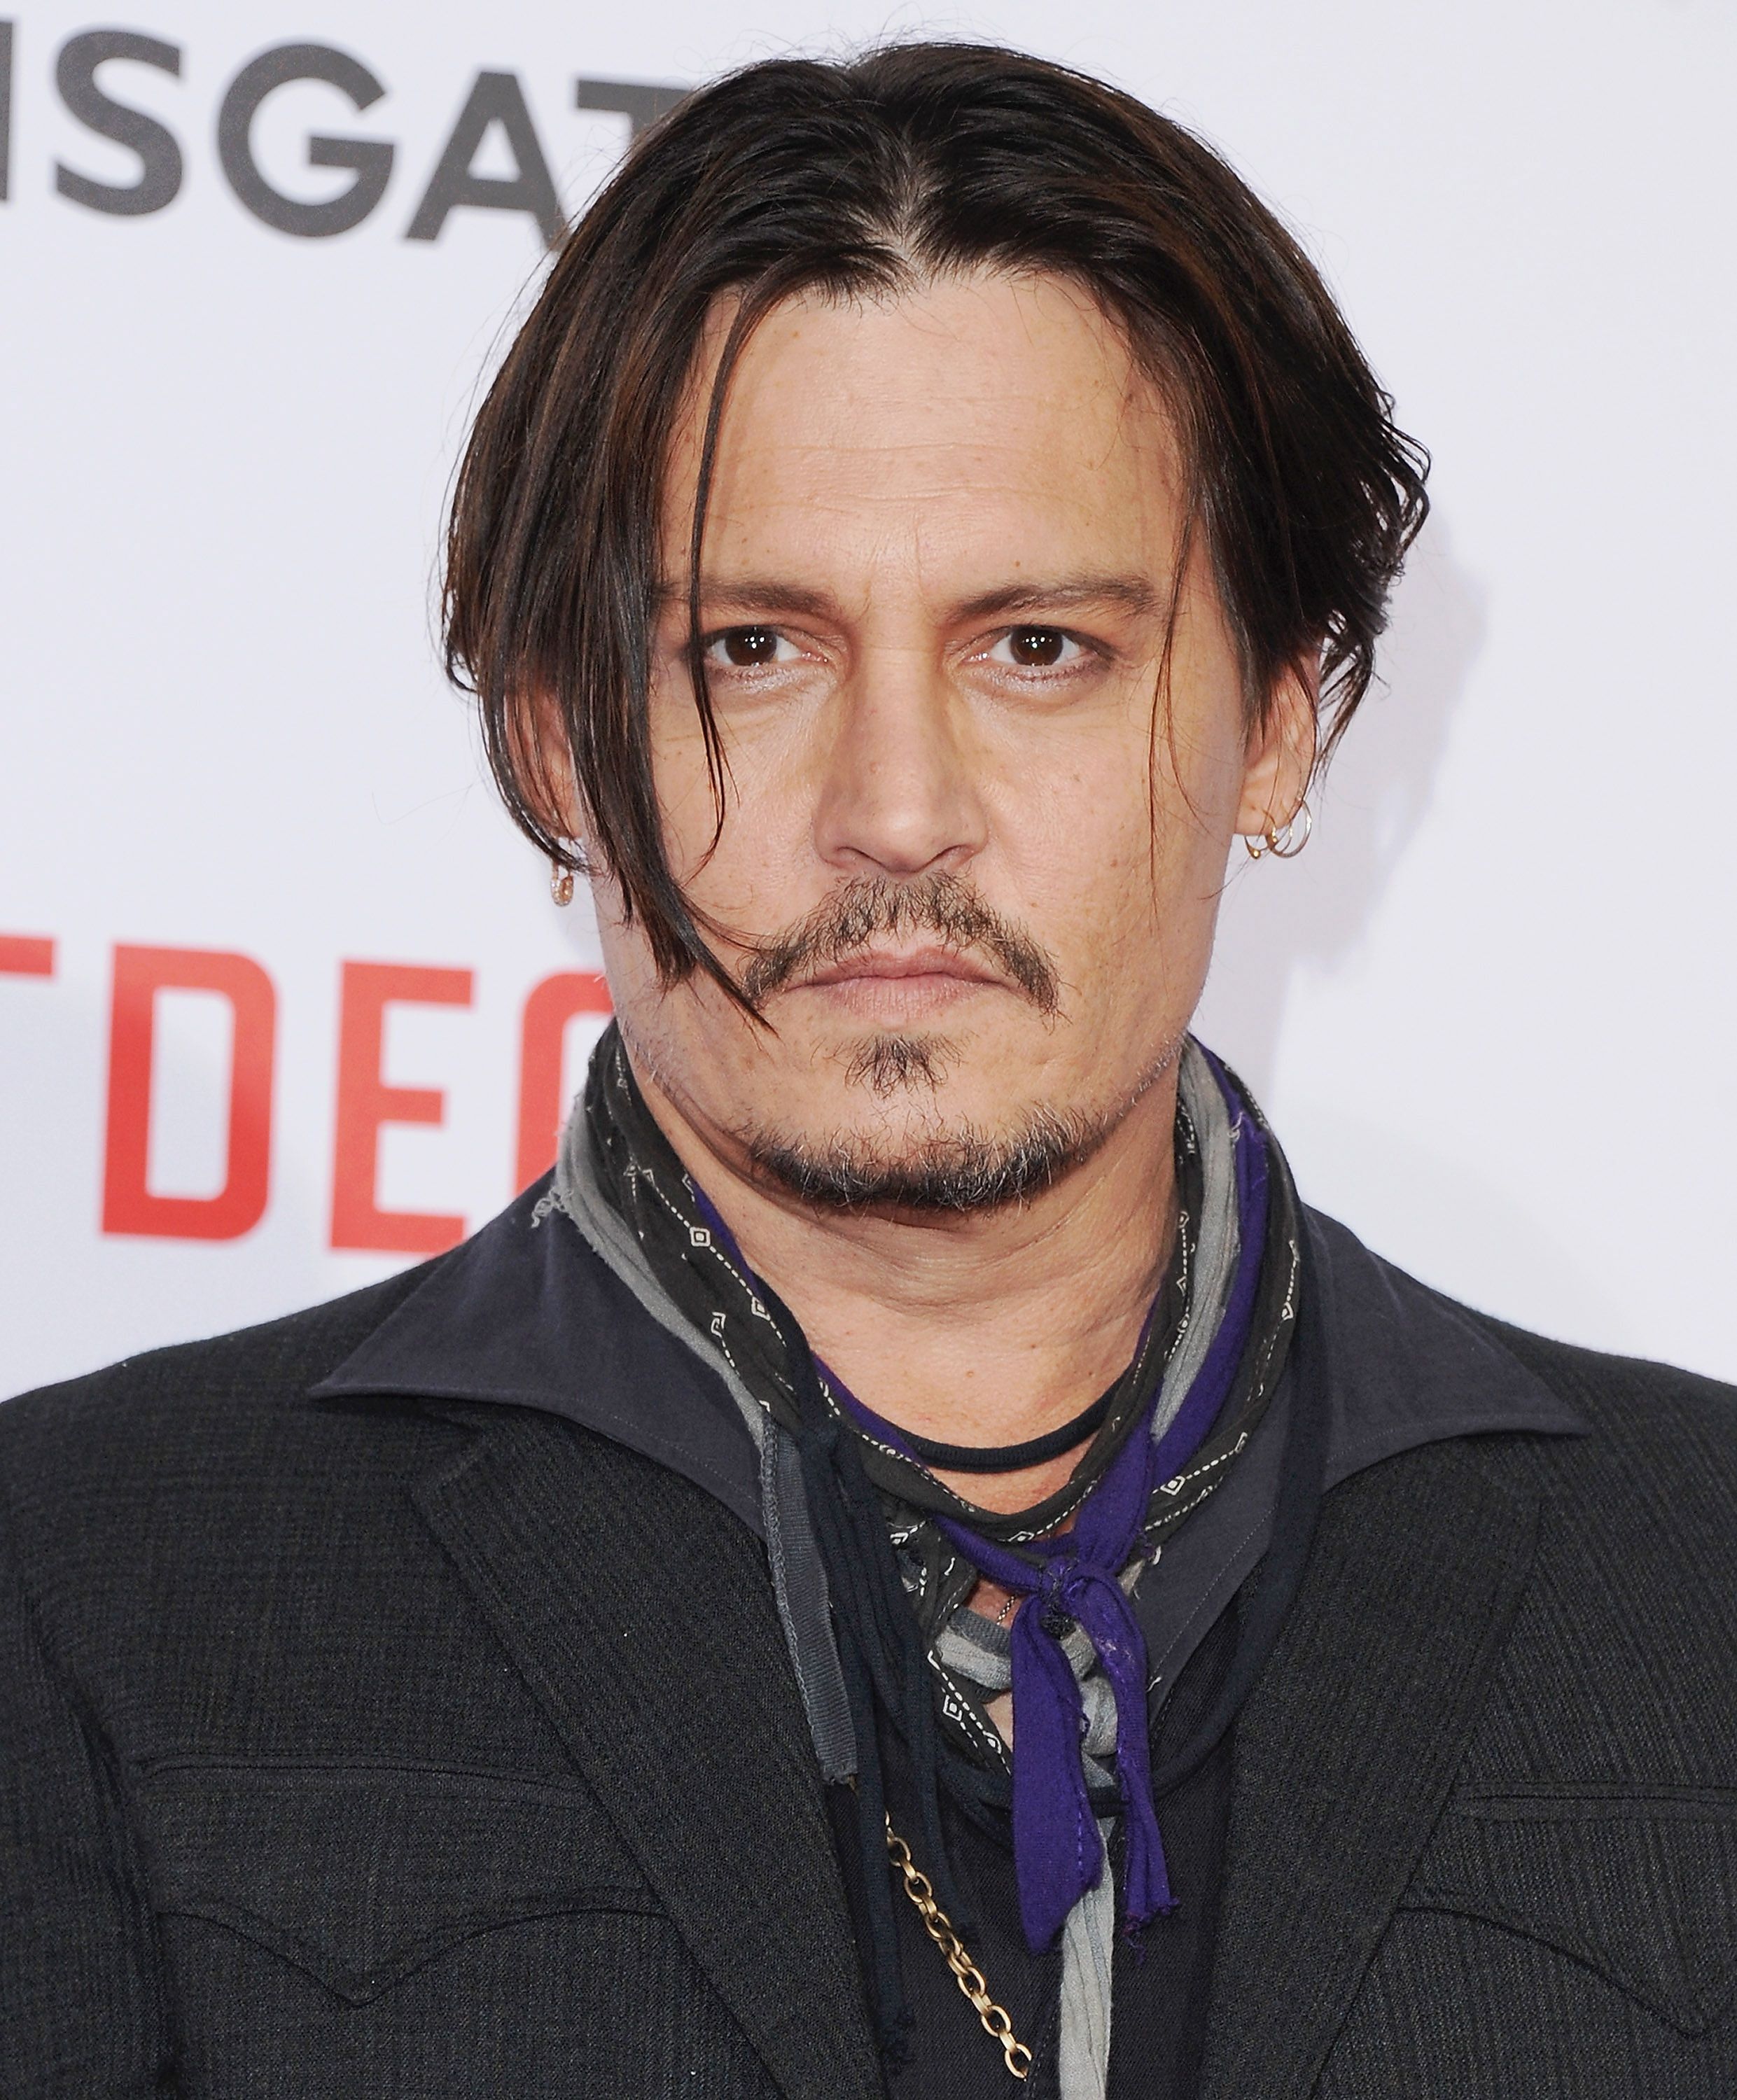 Johnny Depp Birthday: A Look At Some Handsome Photos of Jeanne du Barry  Actor From Young To Old